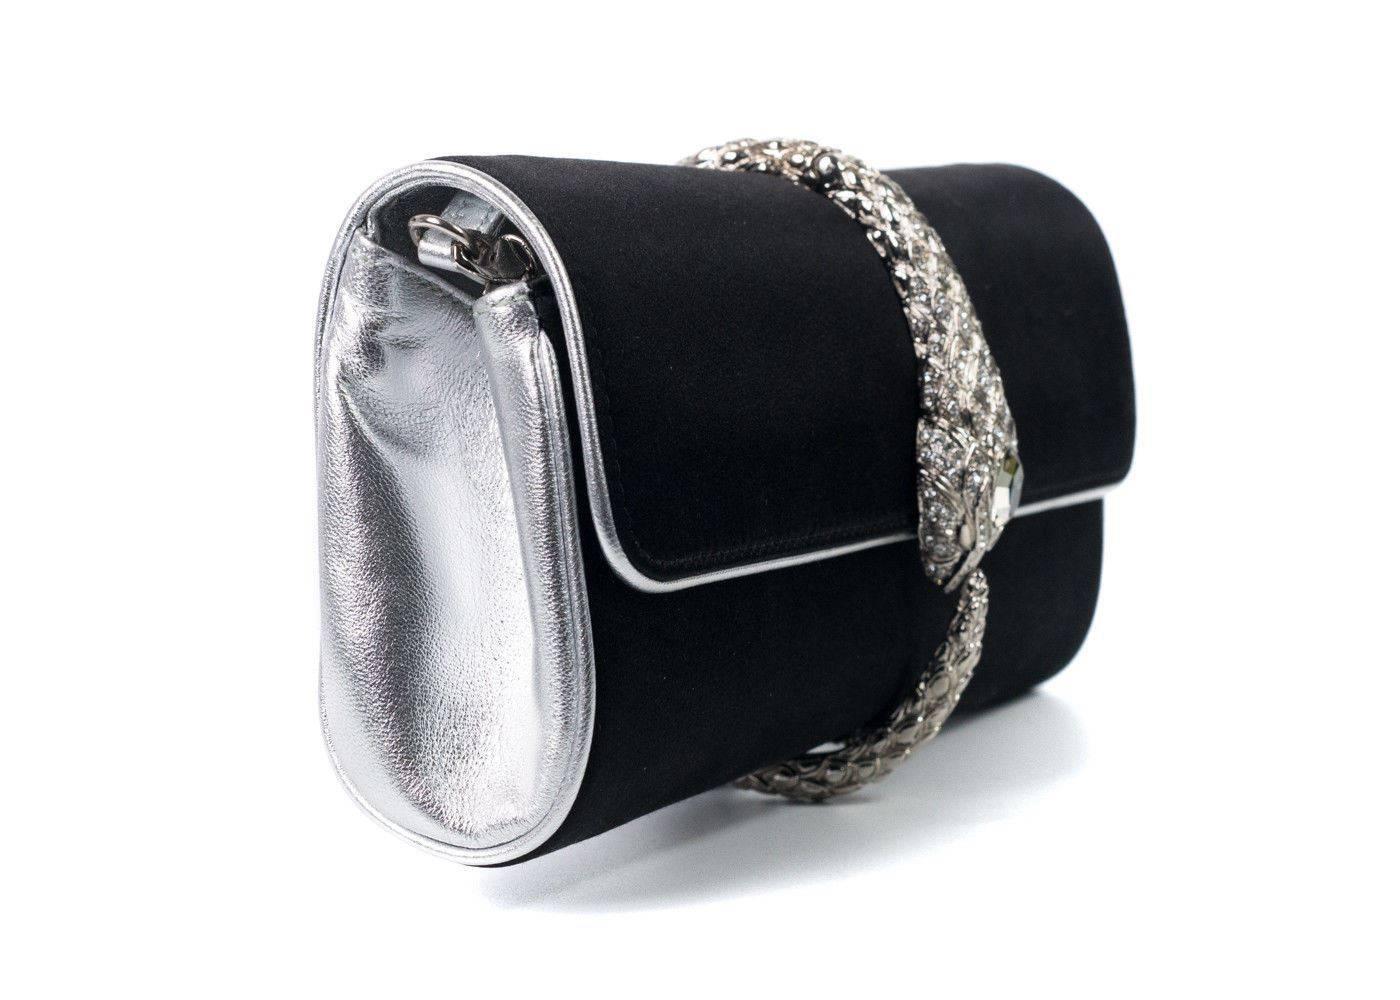 Roberto Cavalli Black Silver Serpent Jewel Clutch Wallet Shoulder Bag In New Condition For Sale In Brooklyn, NY